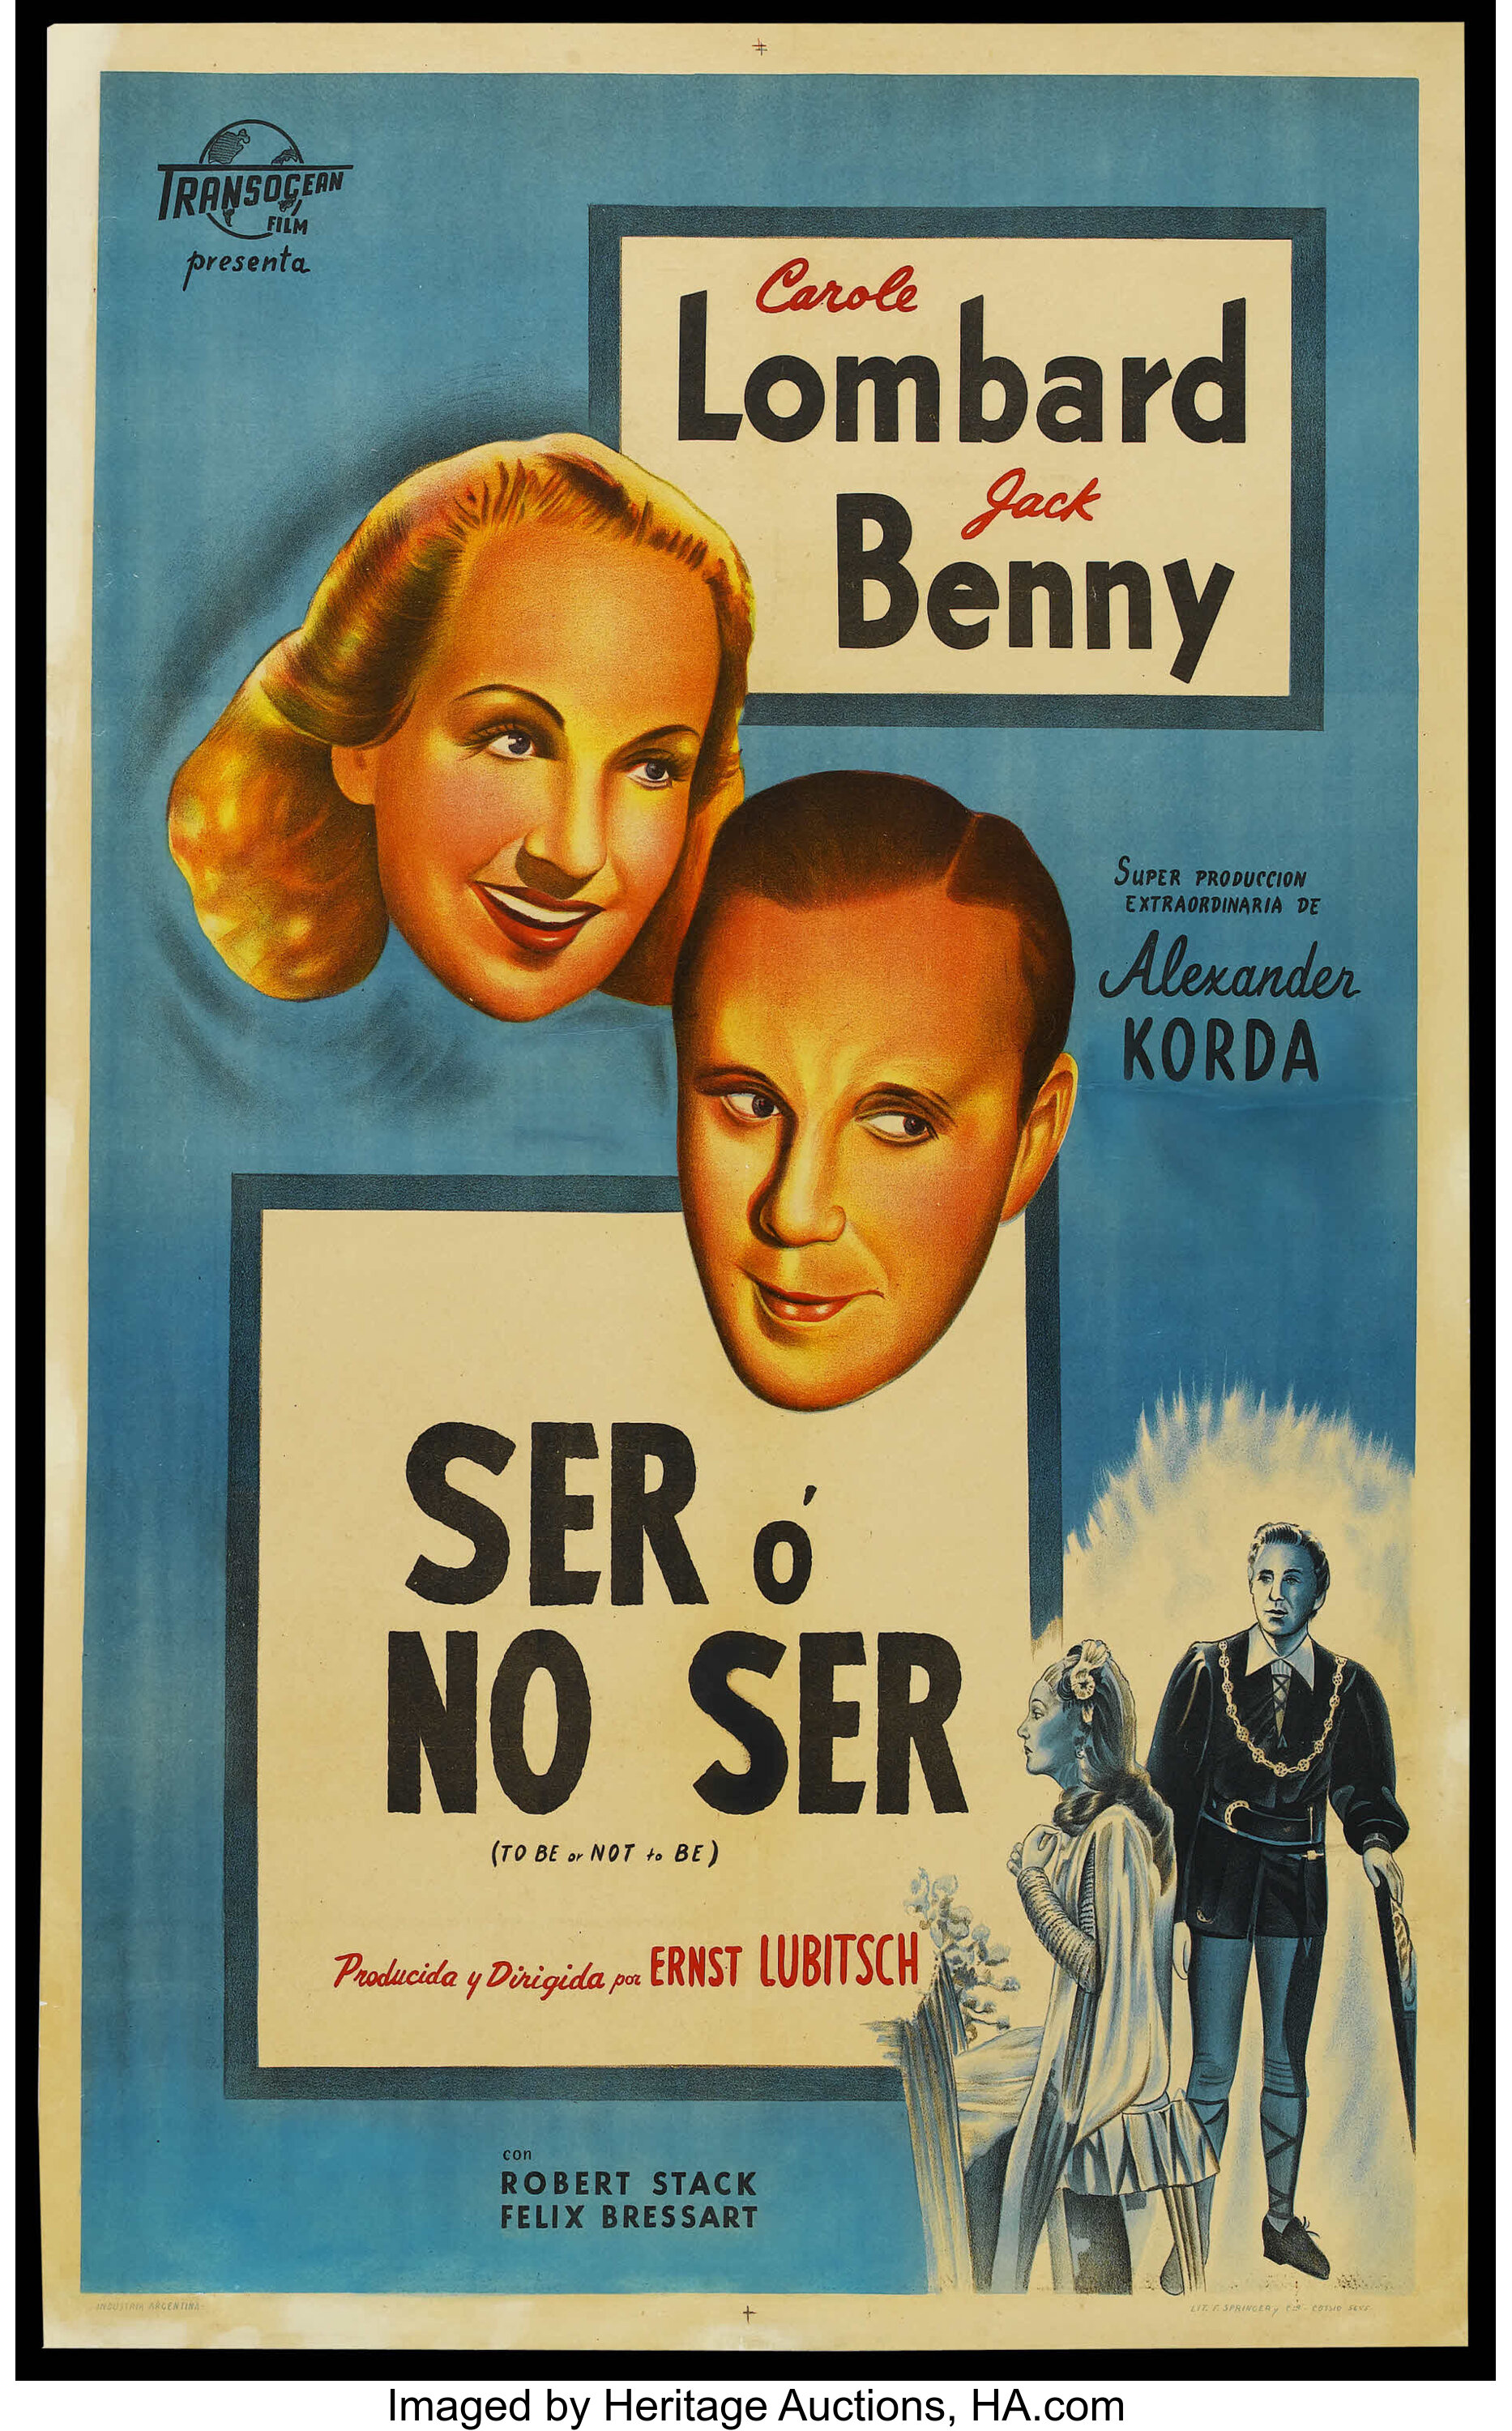 39 HQ Images To Be Or Not To Be Movie / Movie Review To Be Or Not To Be 1942